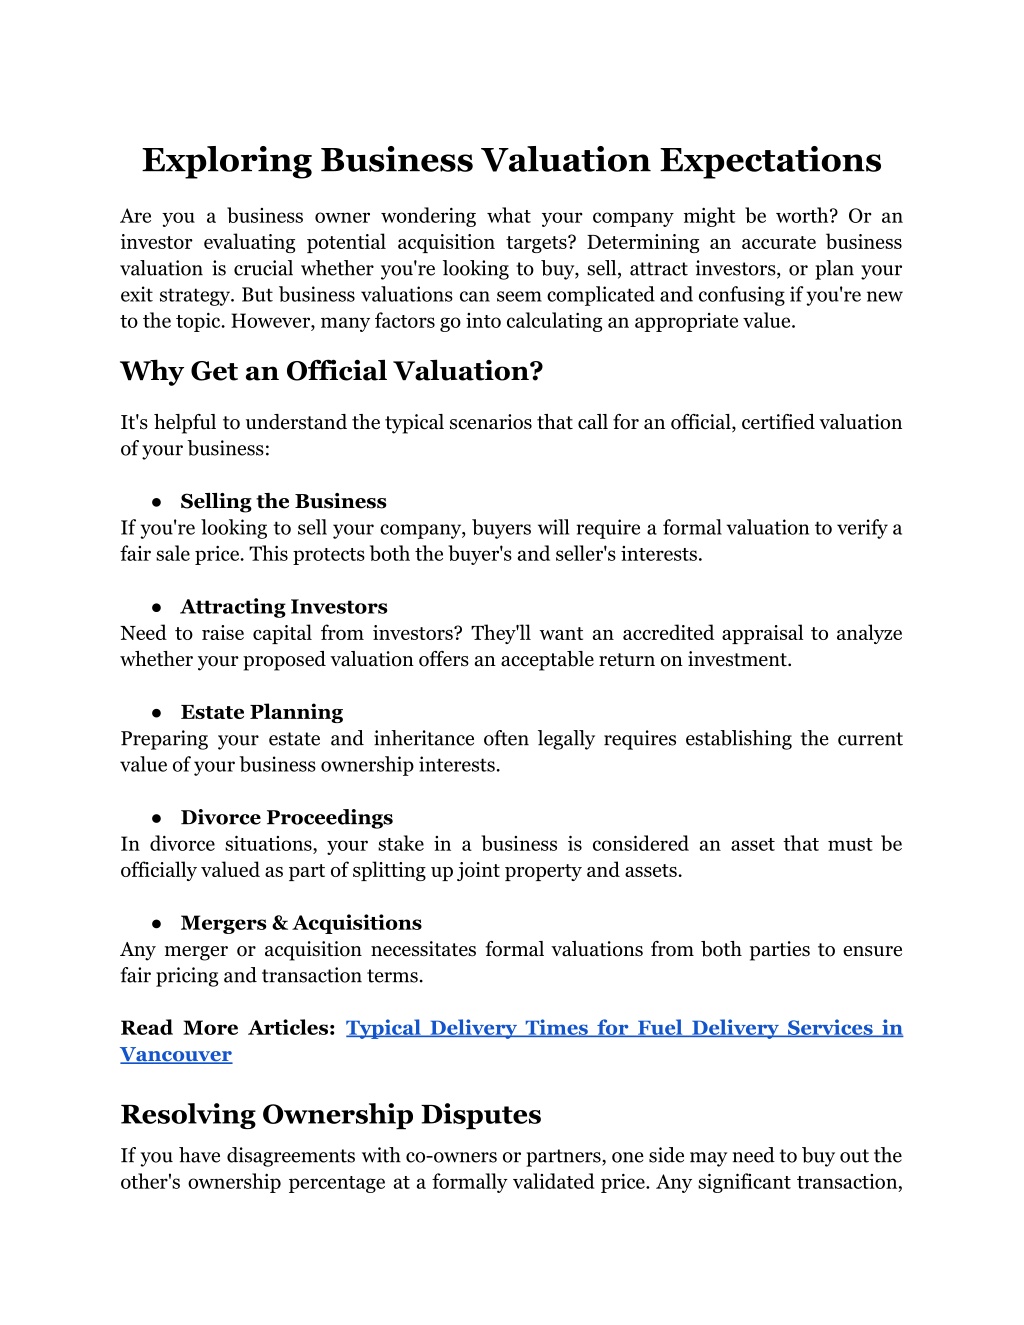 exploring business valuation expectations l.w